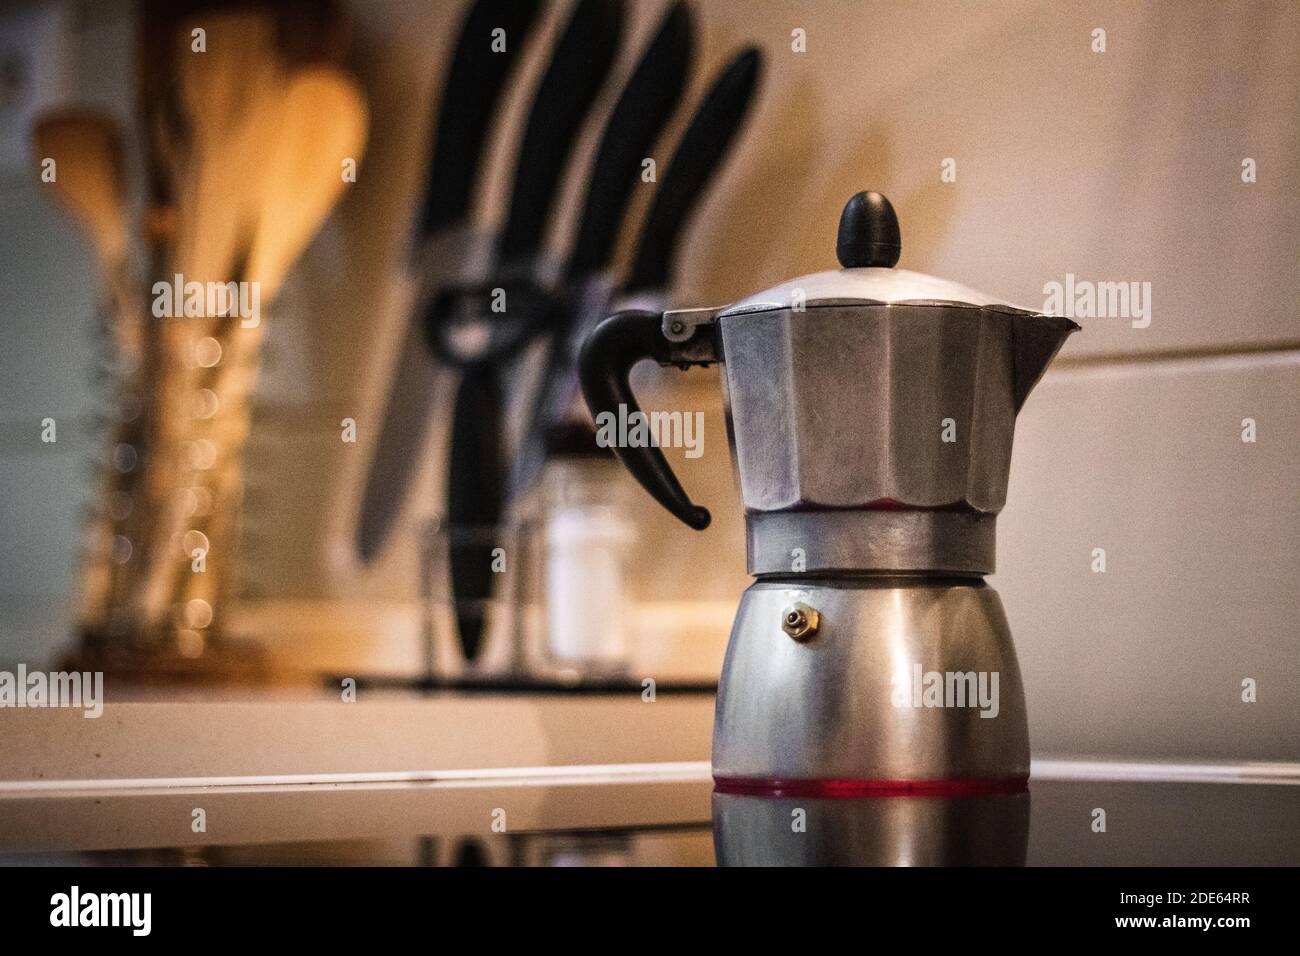 https://c8.alamy.com/comp/2DE64RR/making-coffee-from-boiling-water-on-hot-stove-with-kitchen-counter-in-background-2DE64RR.jpg